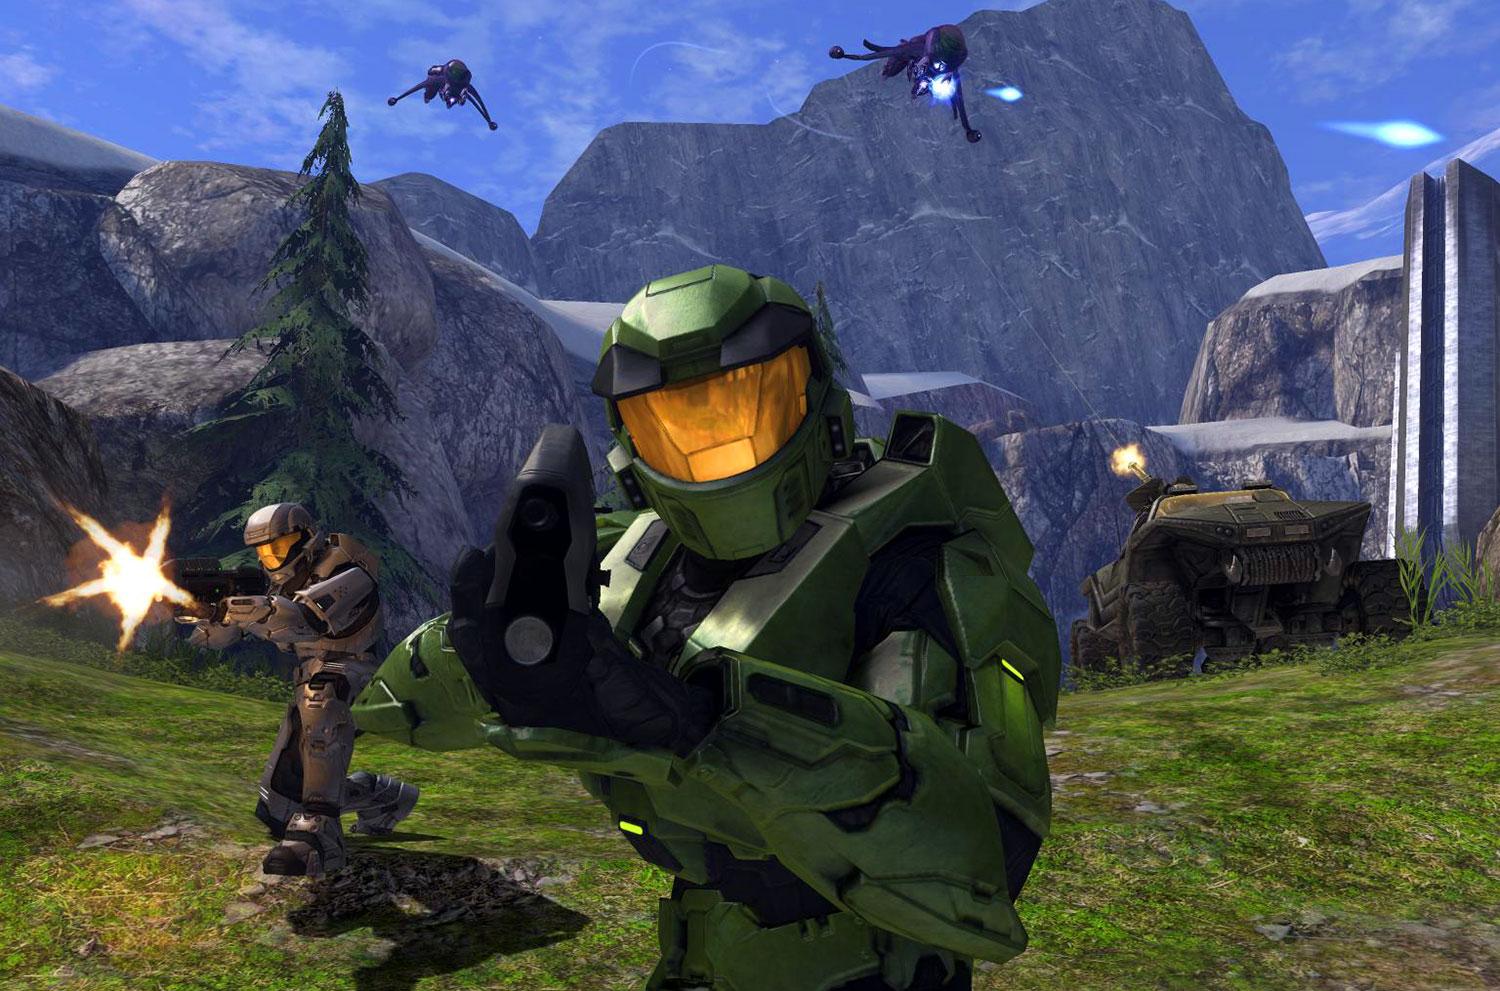 Halo Combat Evolved PC Multiplayer In 2021